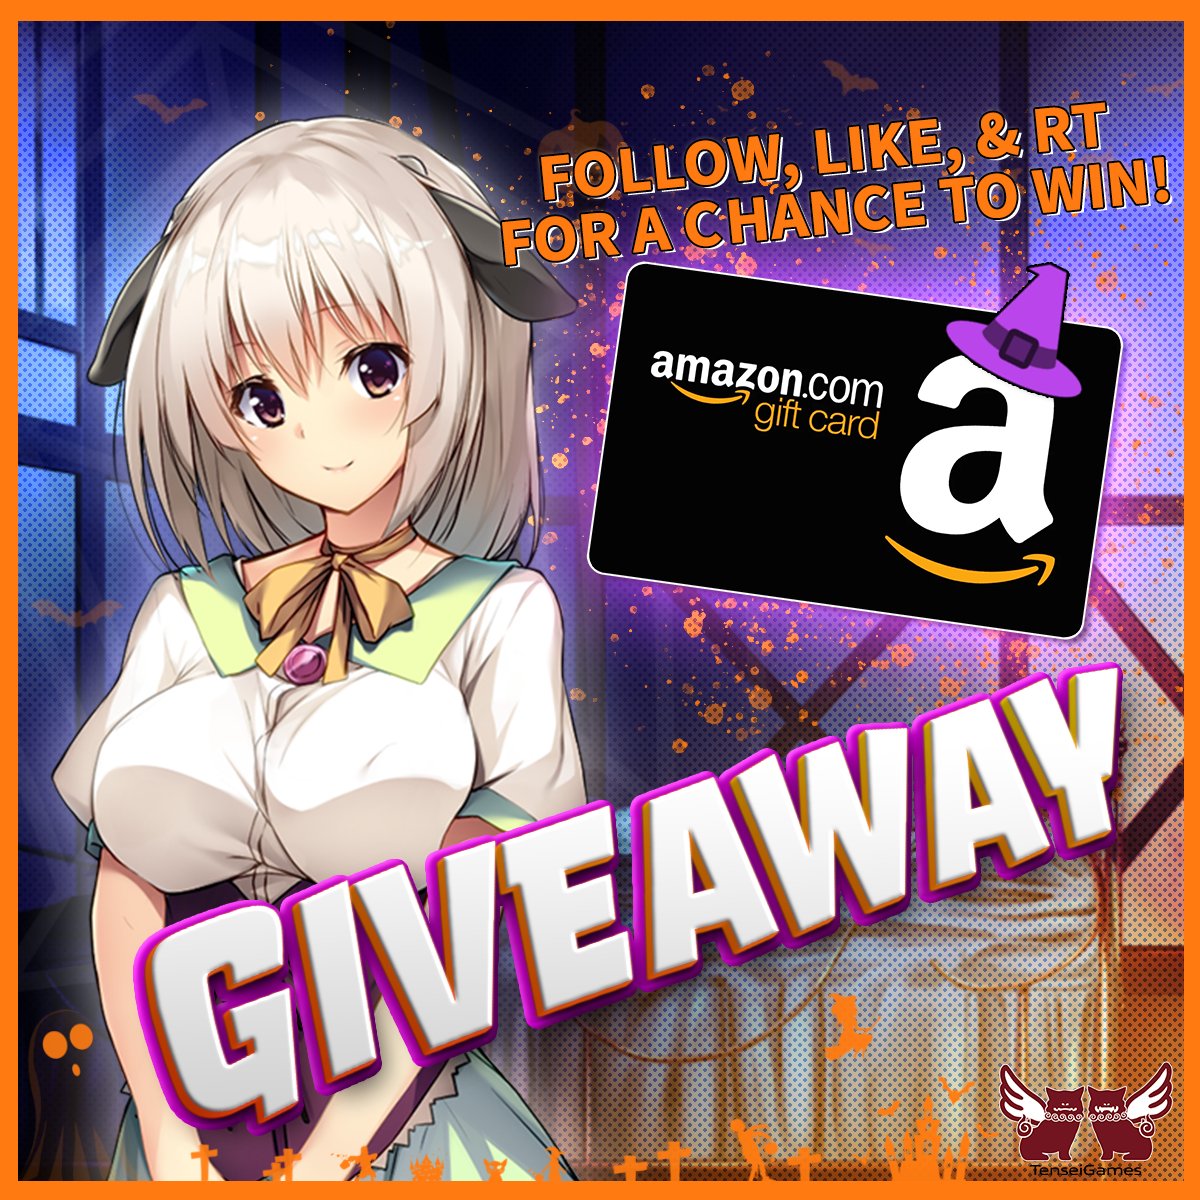 Amazon Gift Card #GIVEAWAY 🥳 We are giving away an Amazon e-gift card worth💸$50 to 1 lucky winner! 1️⃣Follow our account @TenseiGames 2️⃣Like👍& RT this tweet 🕰Ends Oct. 25th, 2023 @ 10:00PM PDT ✨ #primebigdealdays #amazongift #free